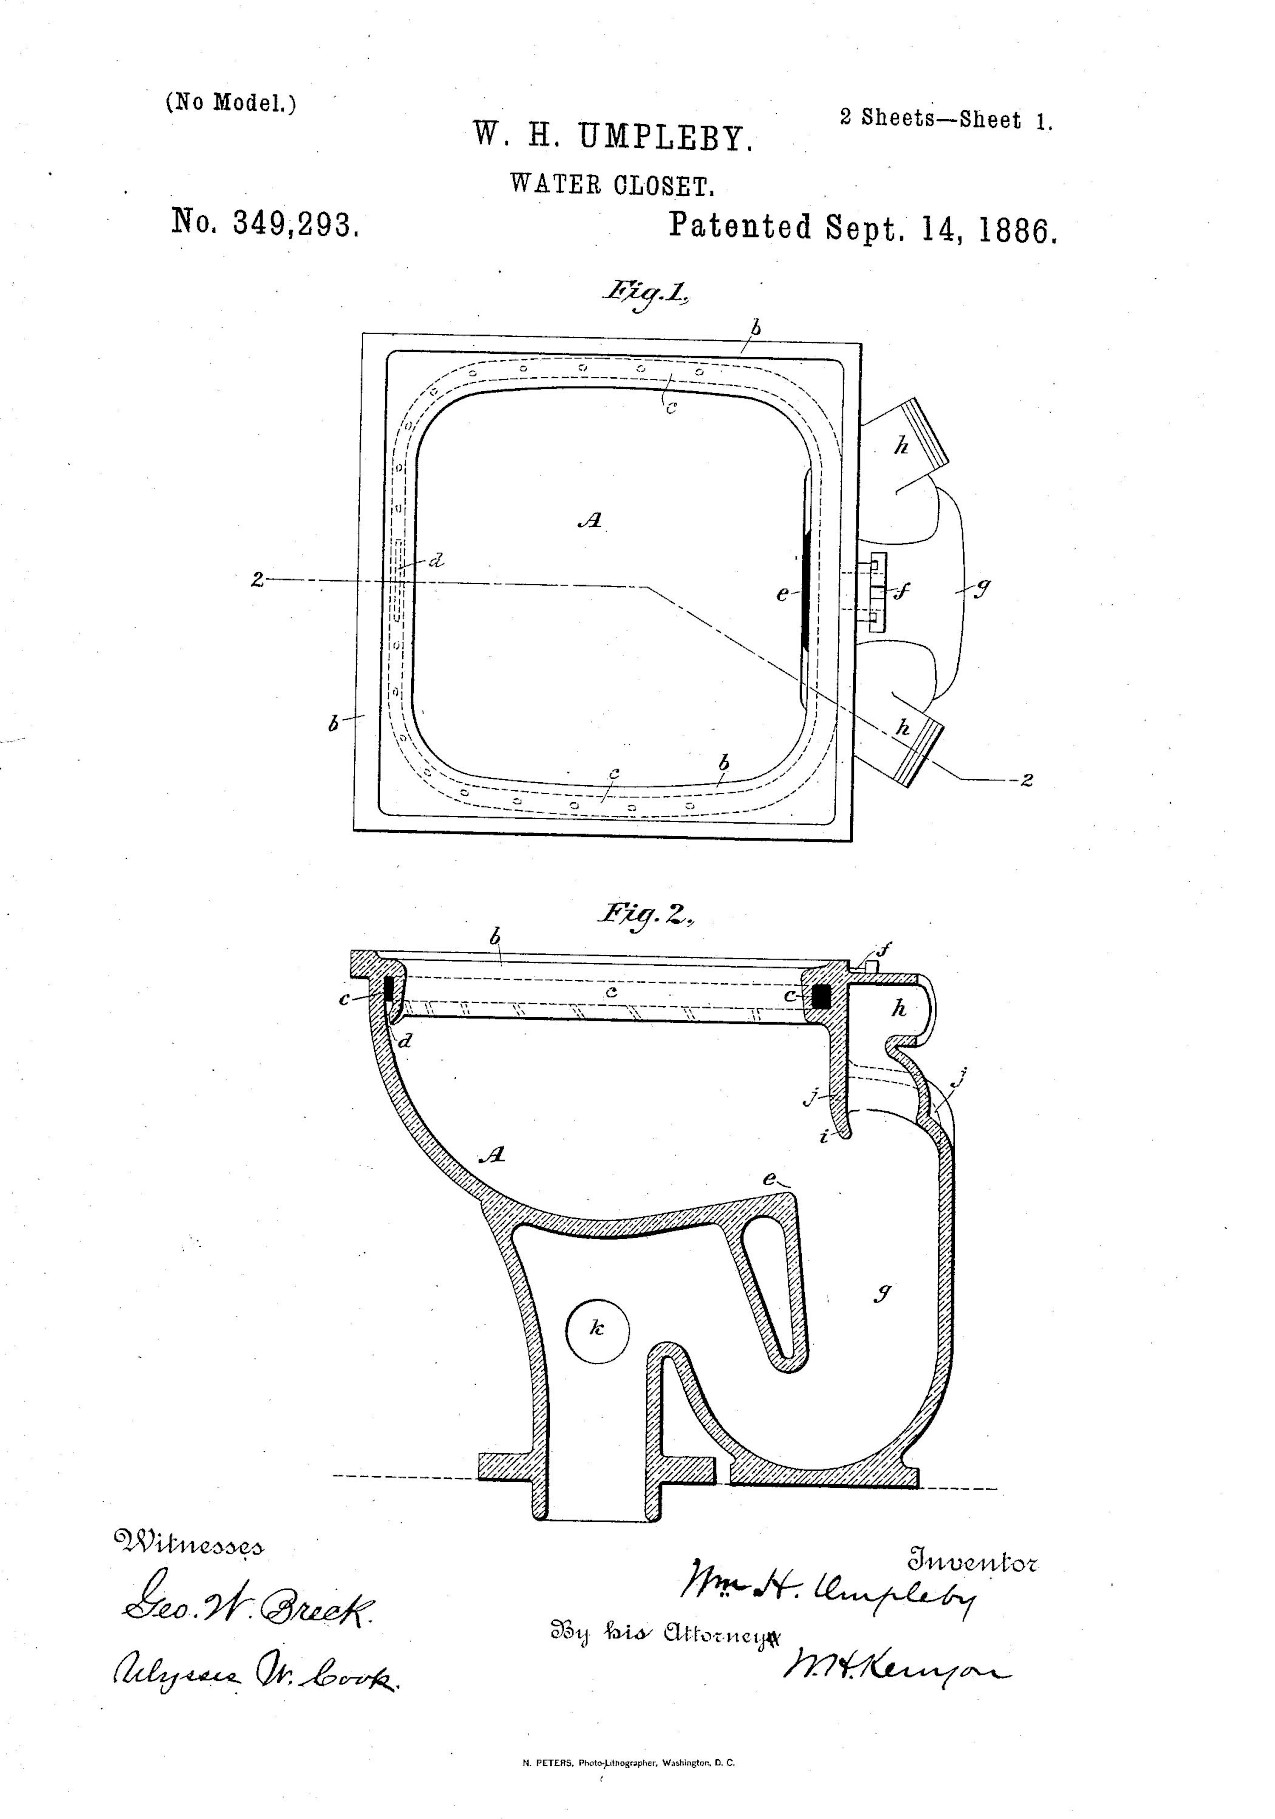 Drawing from William H. Umpleby’s 1886 water closet patent.